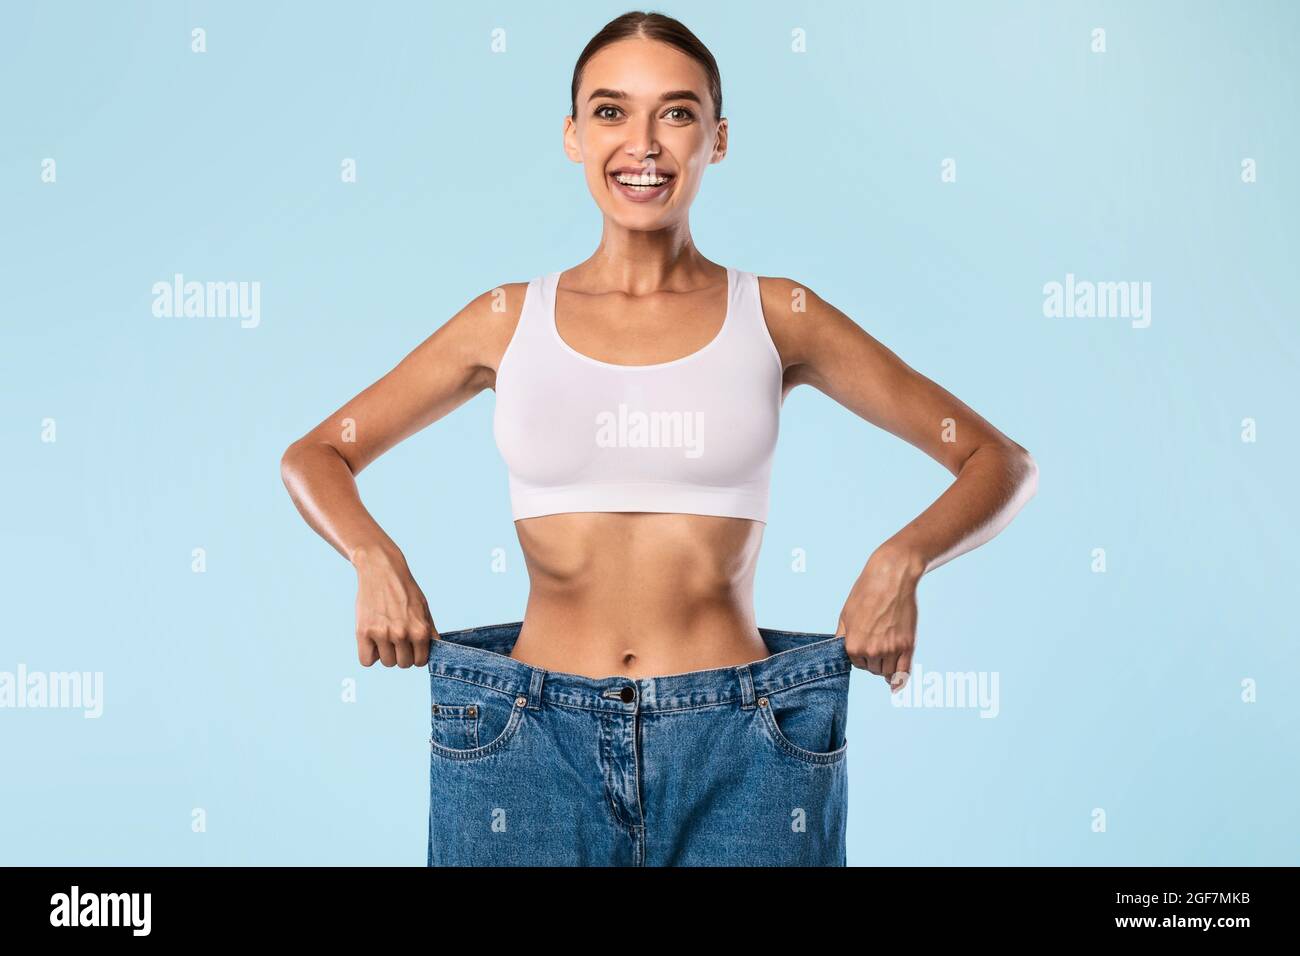 Woman Pulling Her Old Large Loose Jeans And Posing Stock Photo